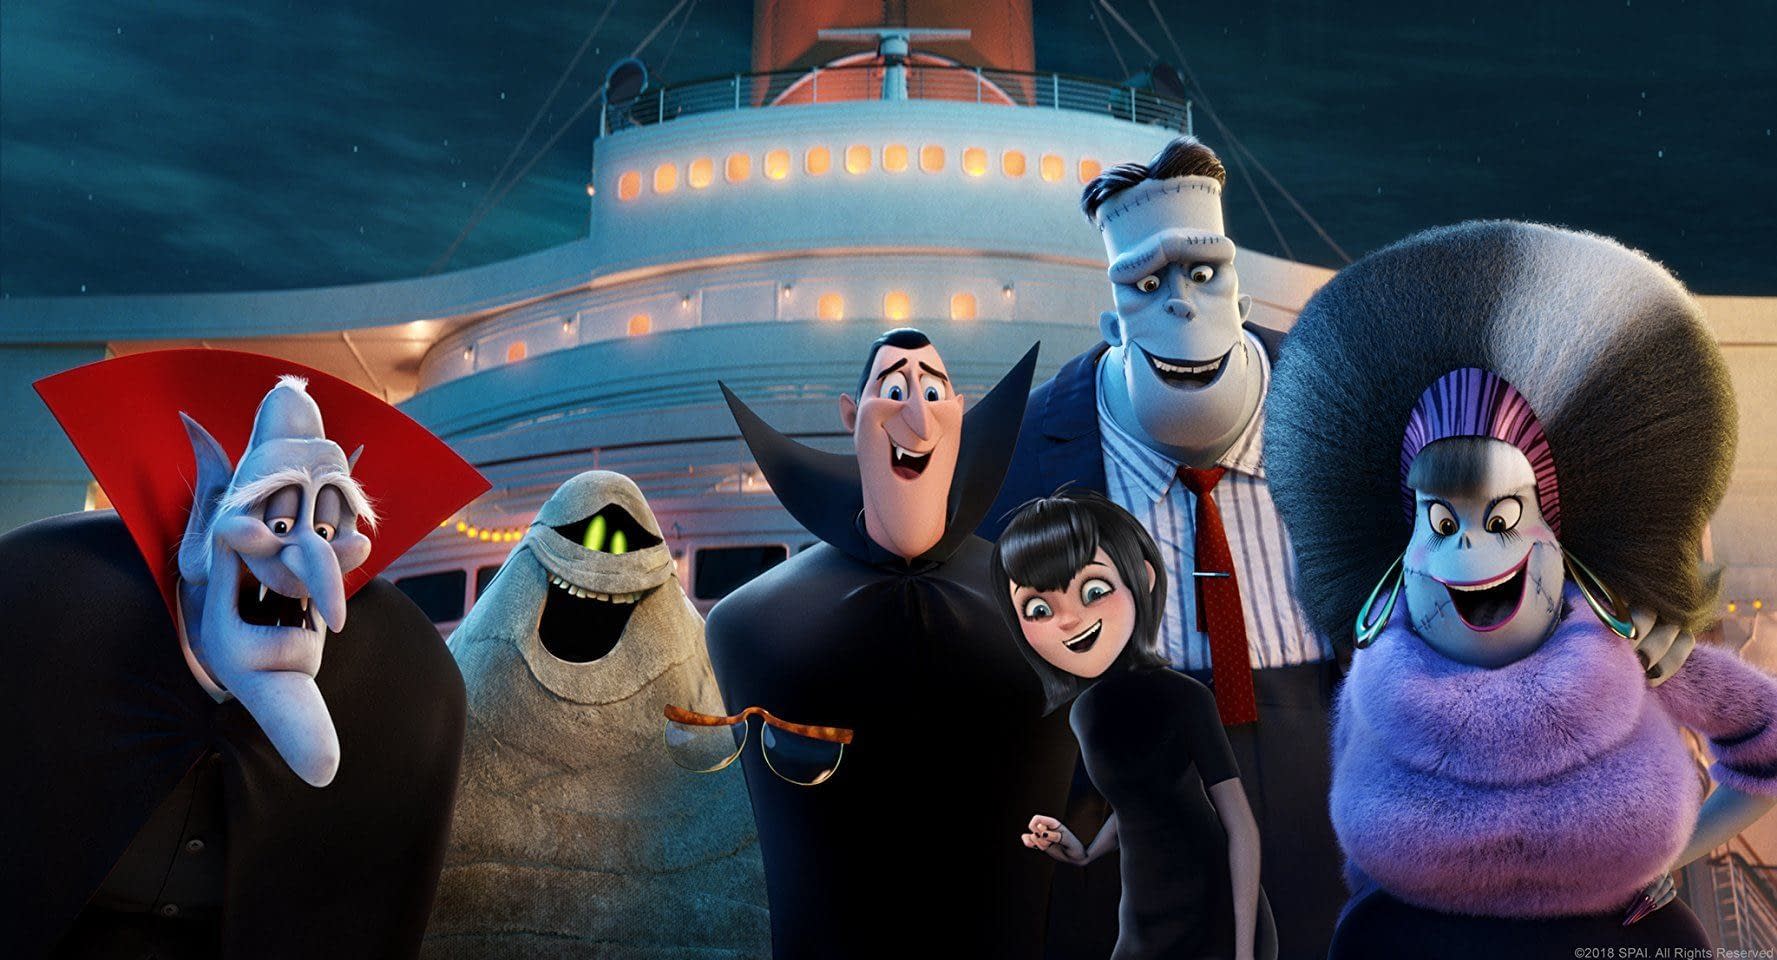 Hotel Transylvania 3 Looking to Take the Box Office with $41M Debut